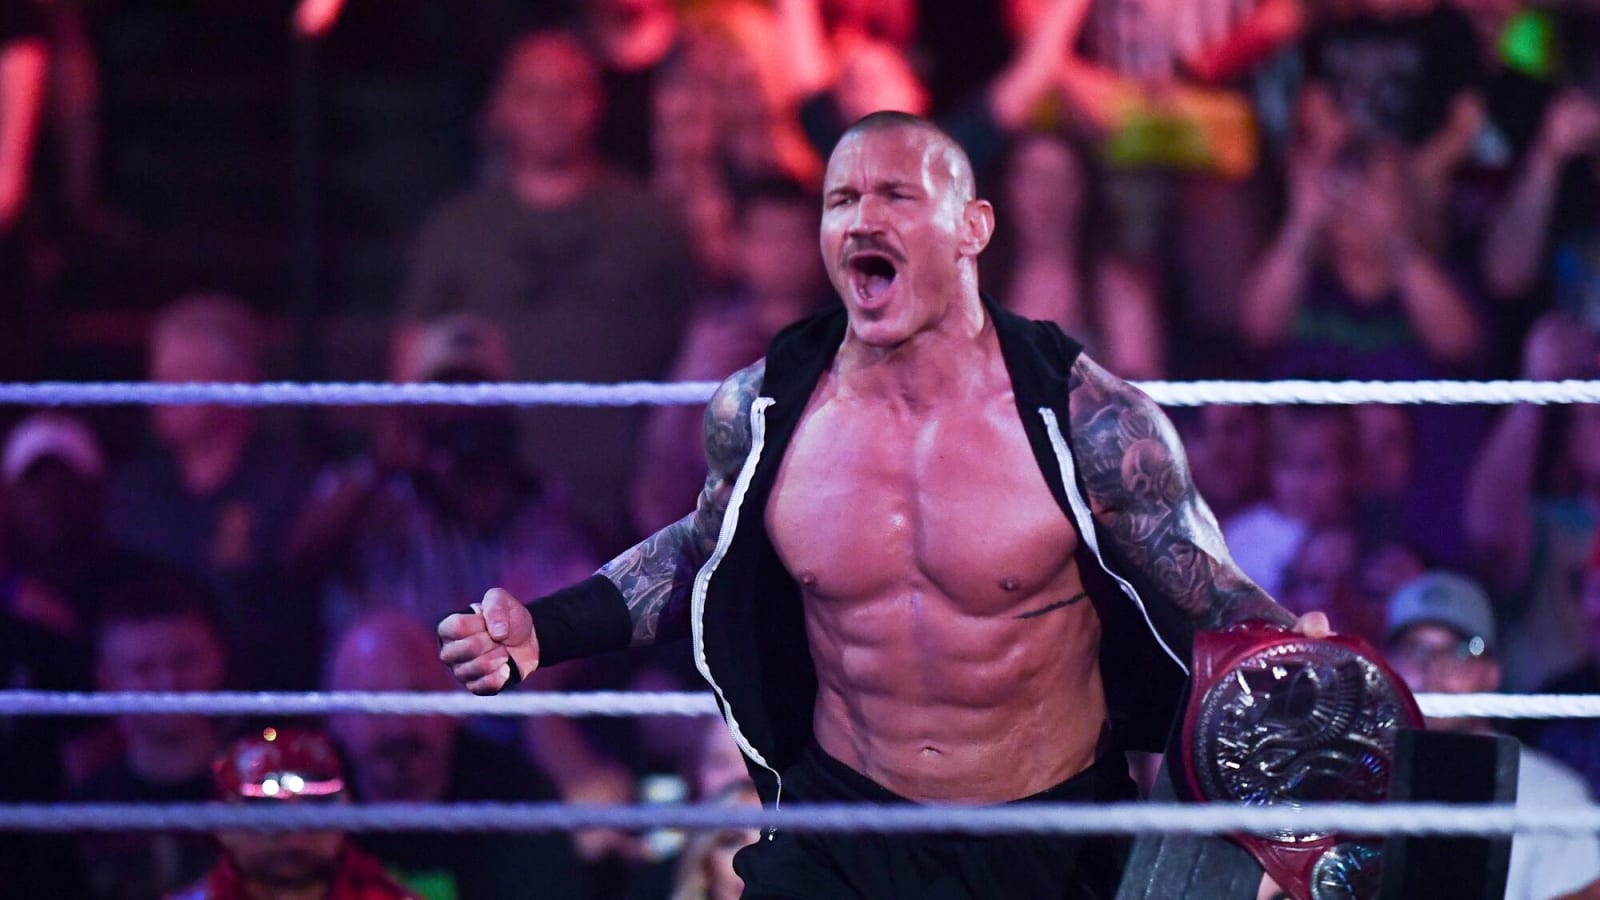 'Wasn’t always perfect in his younger years': Former World Champion details how Randy Orton is perceived backstage in light of bullying accusations